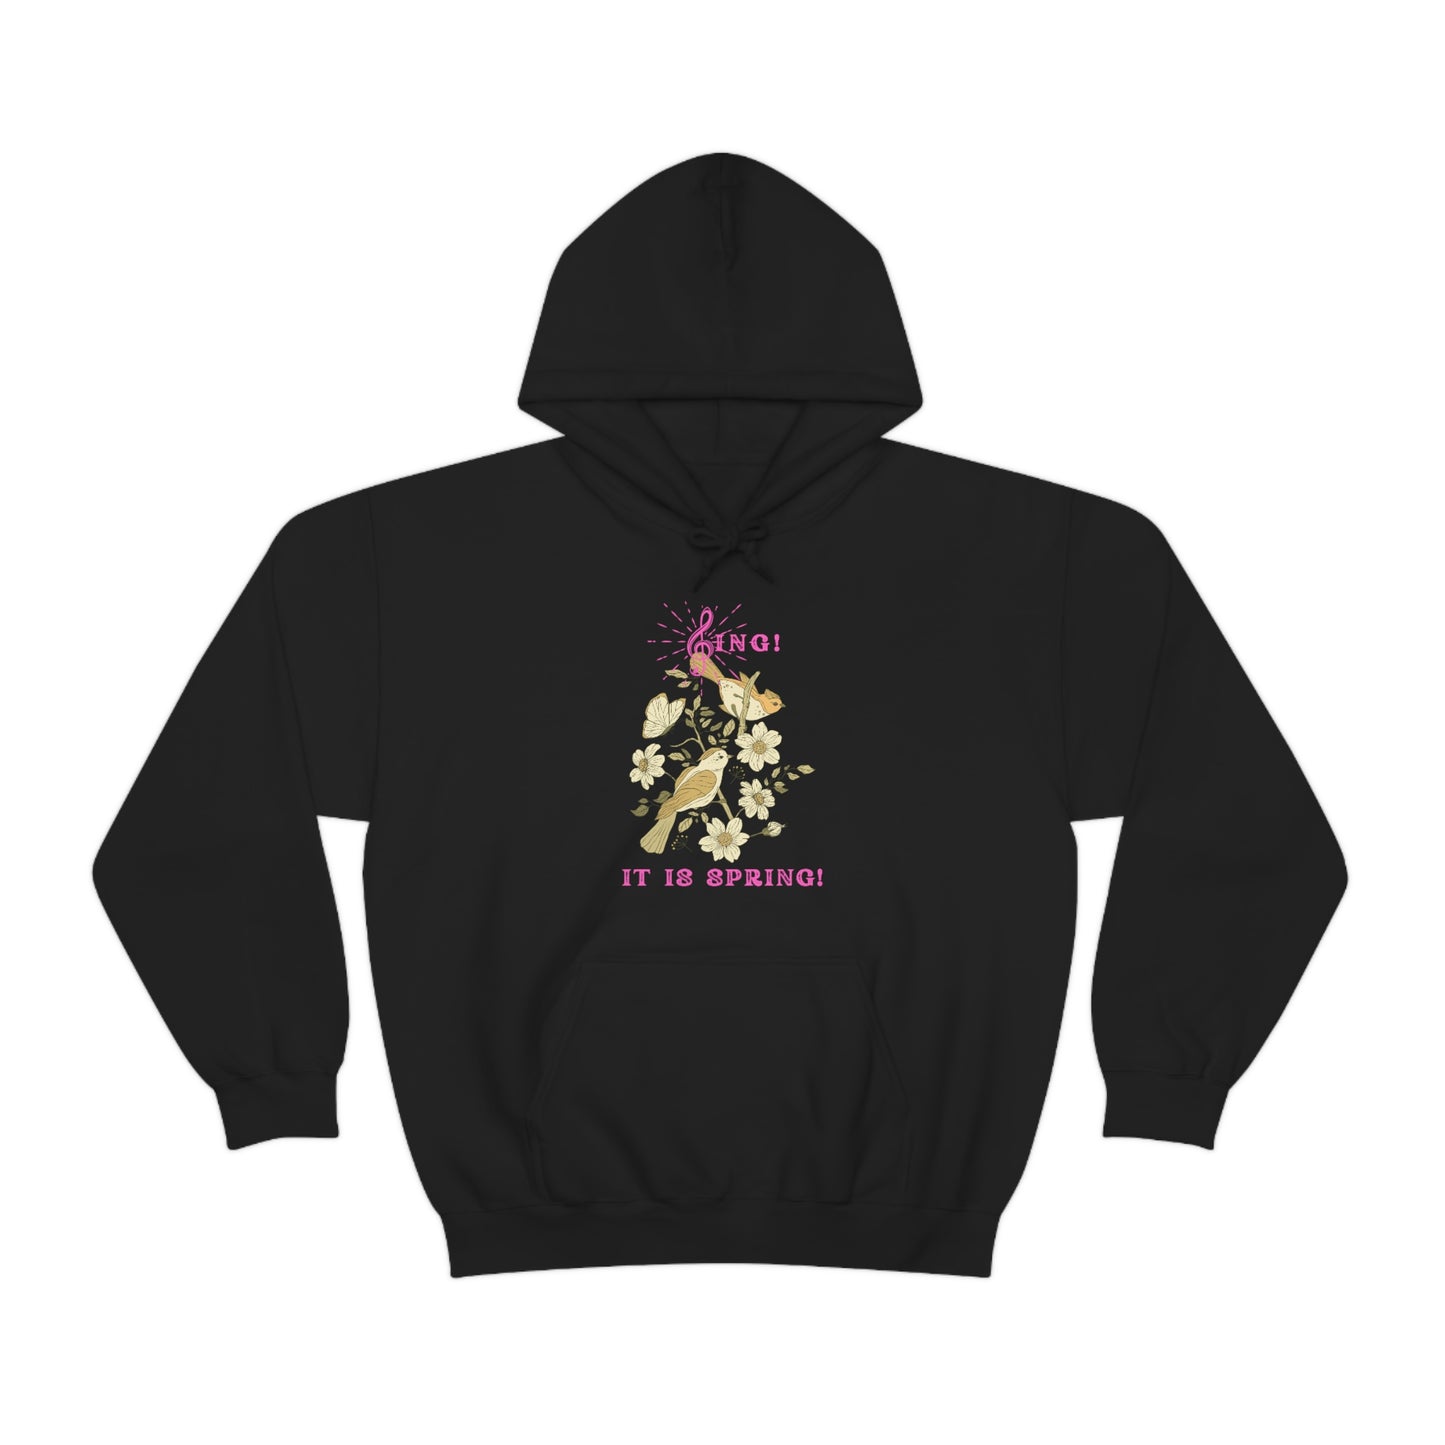 SING IT IS SPRING UNISEX HOODIE GIFT WITH PINK FONT